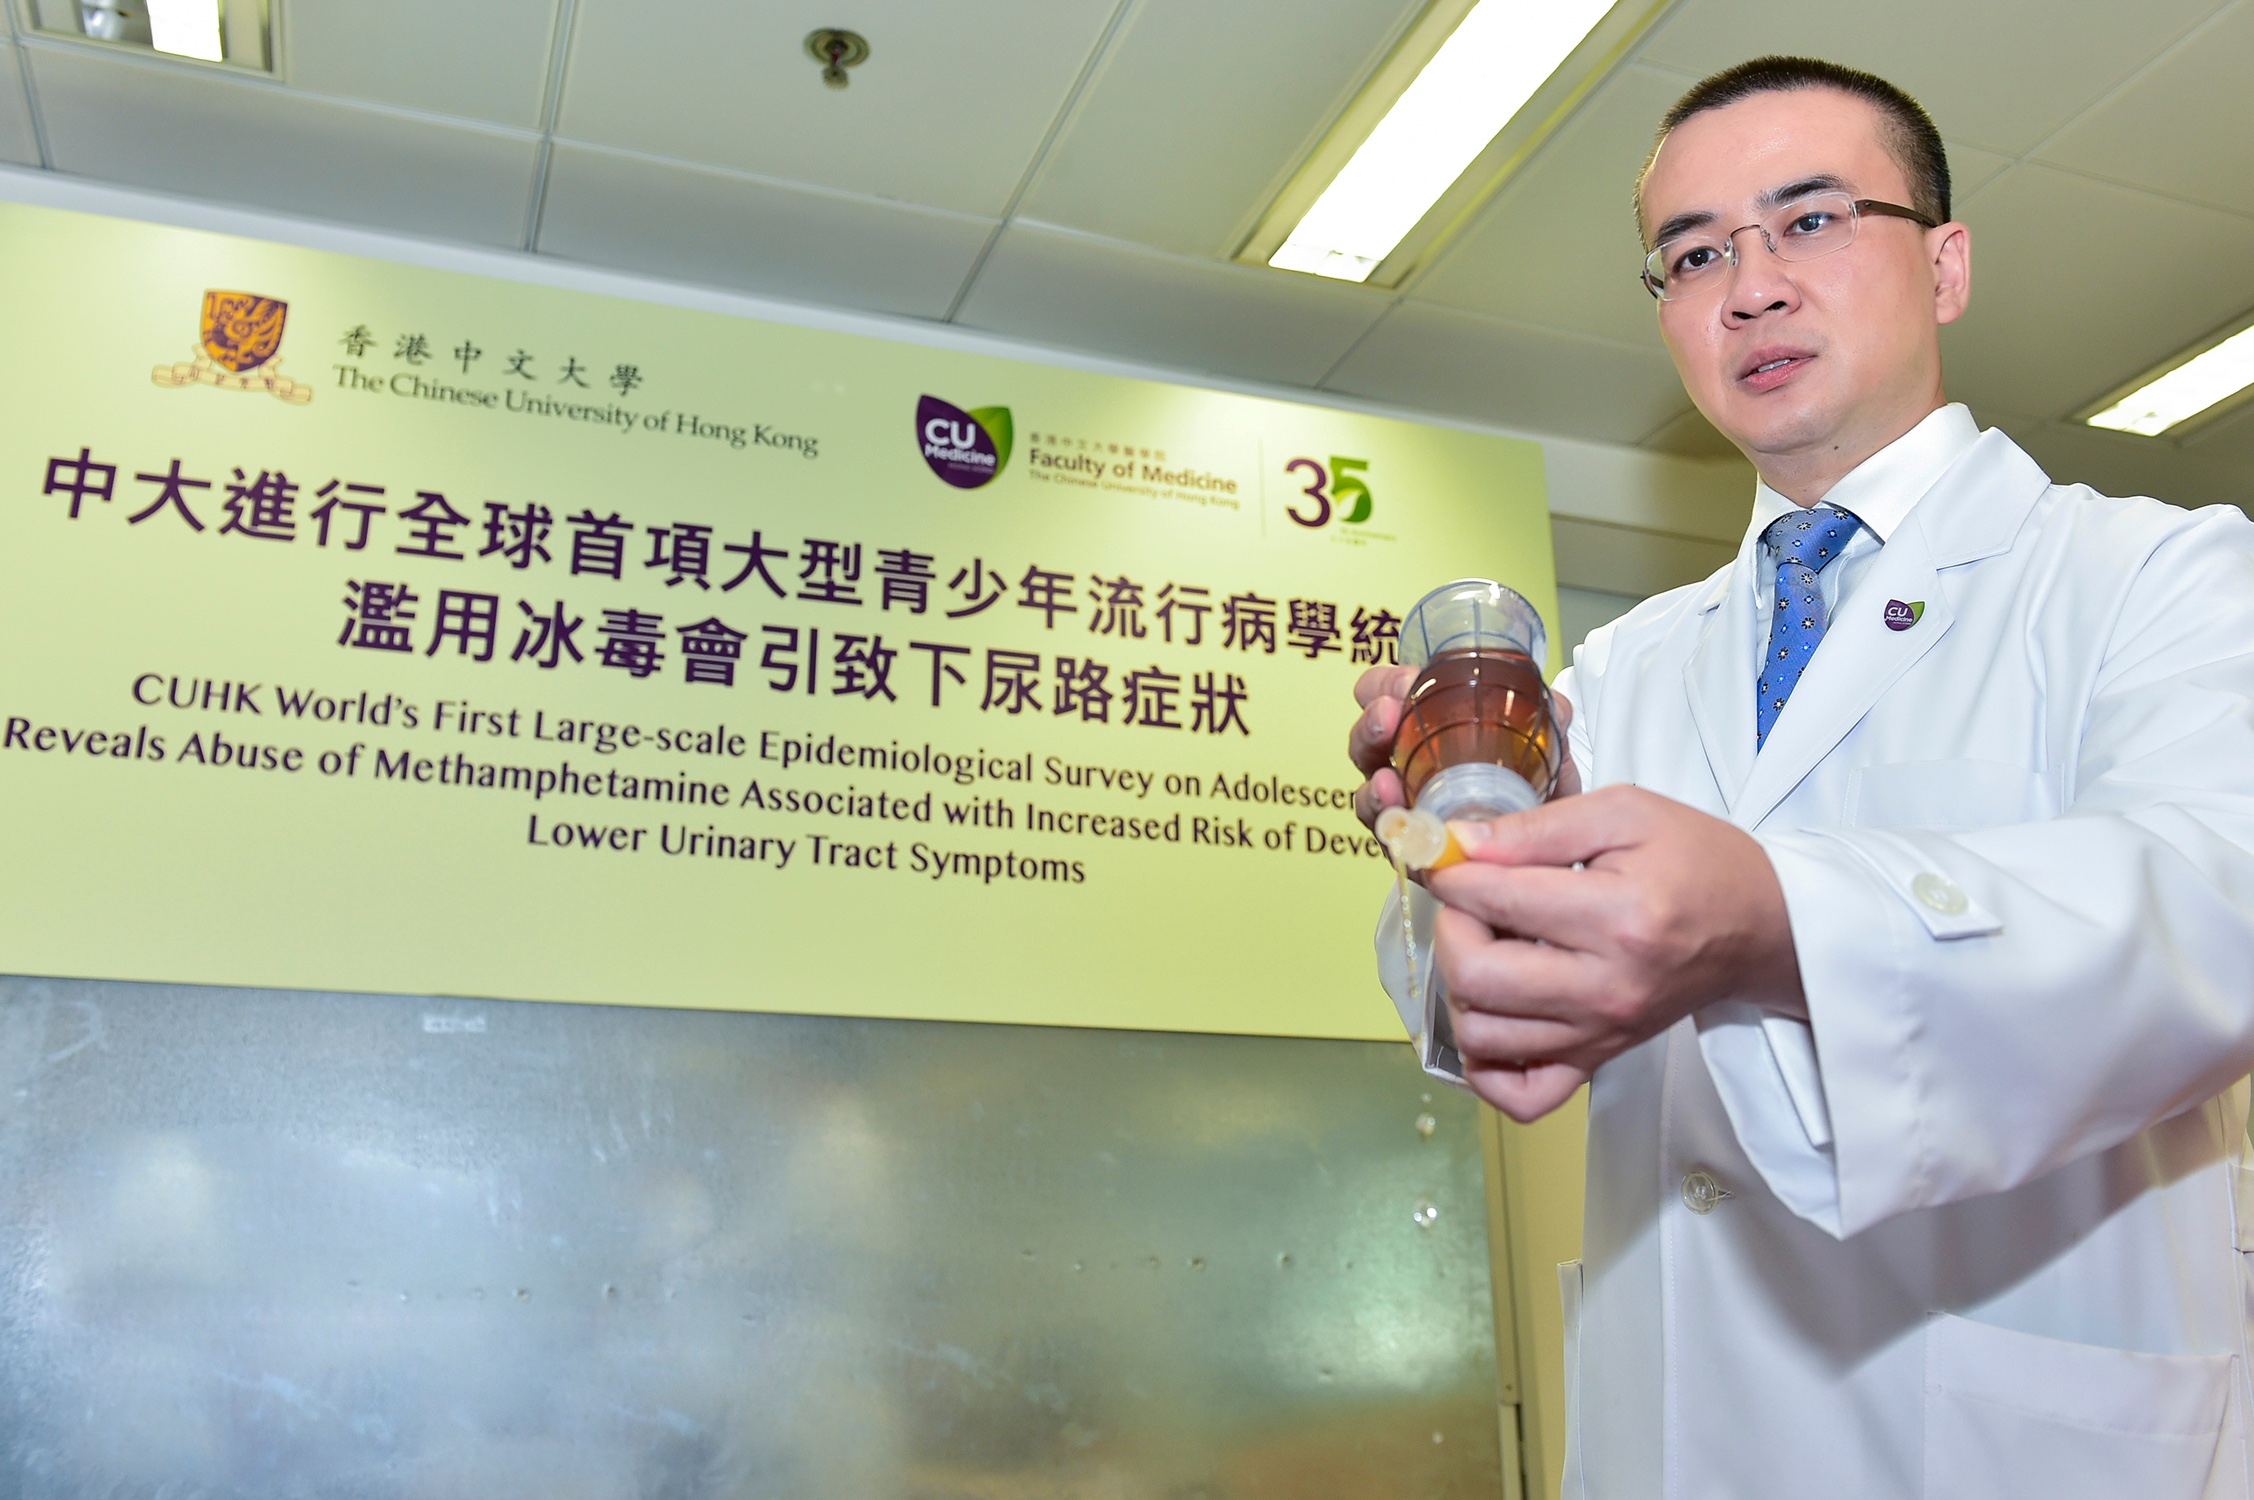 Prof. Chi Fai NG, Division of Urology, Department of Surgery, Faculty of Medicine, CUHK and Co-Director of Youth Urological Treatment Clinic says ‘ice’ may affect the nerve system controlling the urinary bladder sphincter system, leading to urinary tract dysfunction. 